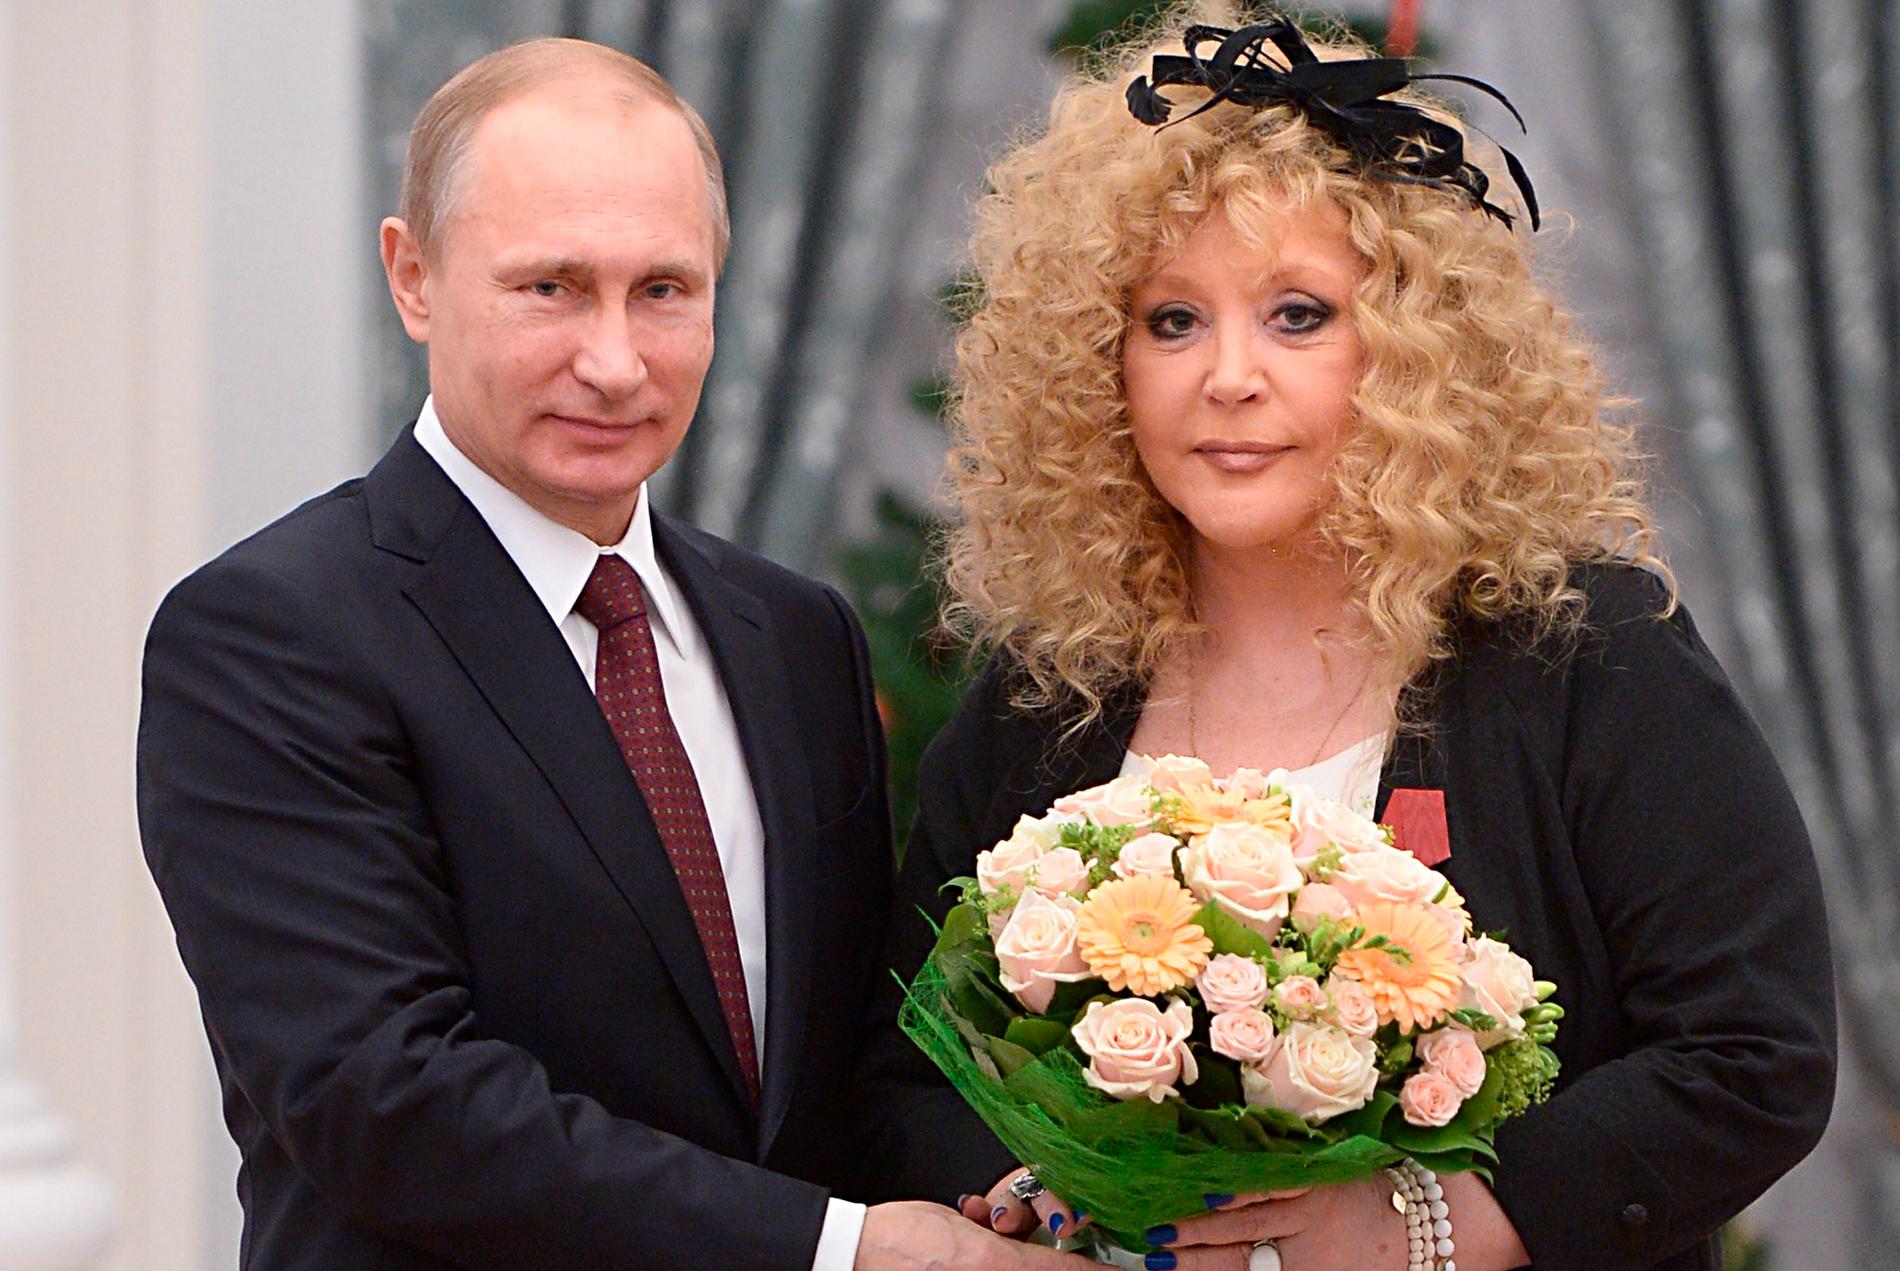 Russian pop singer is being mocked after criticizing Putin - VG